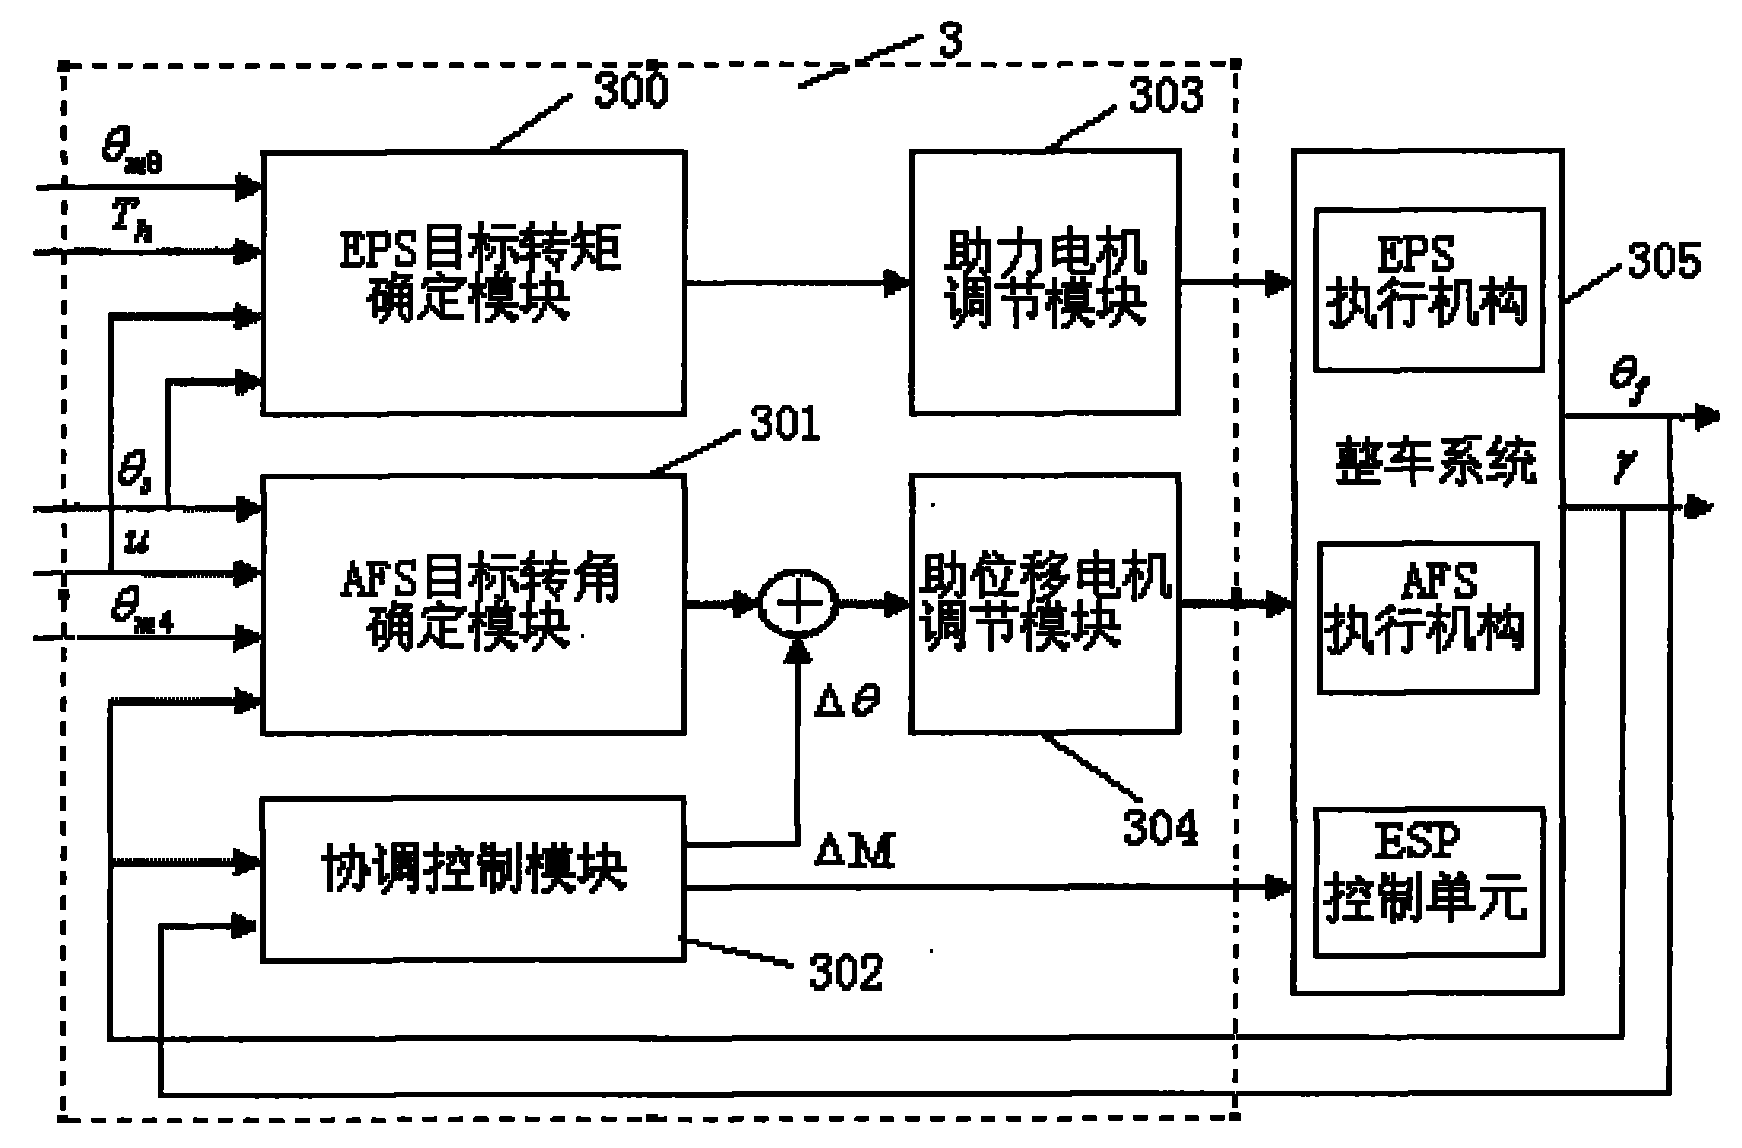 Control device for automotive active steering system